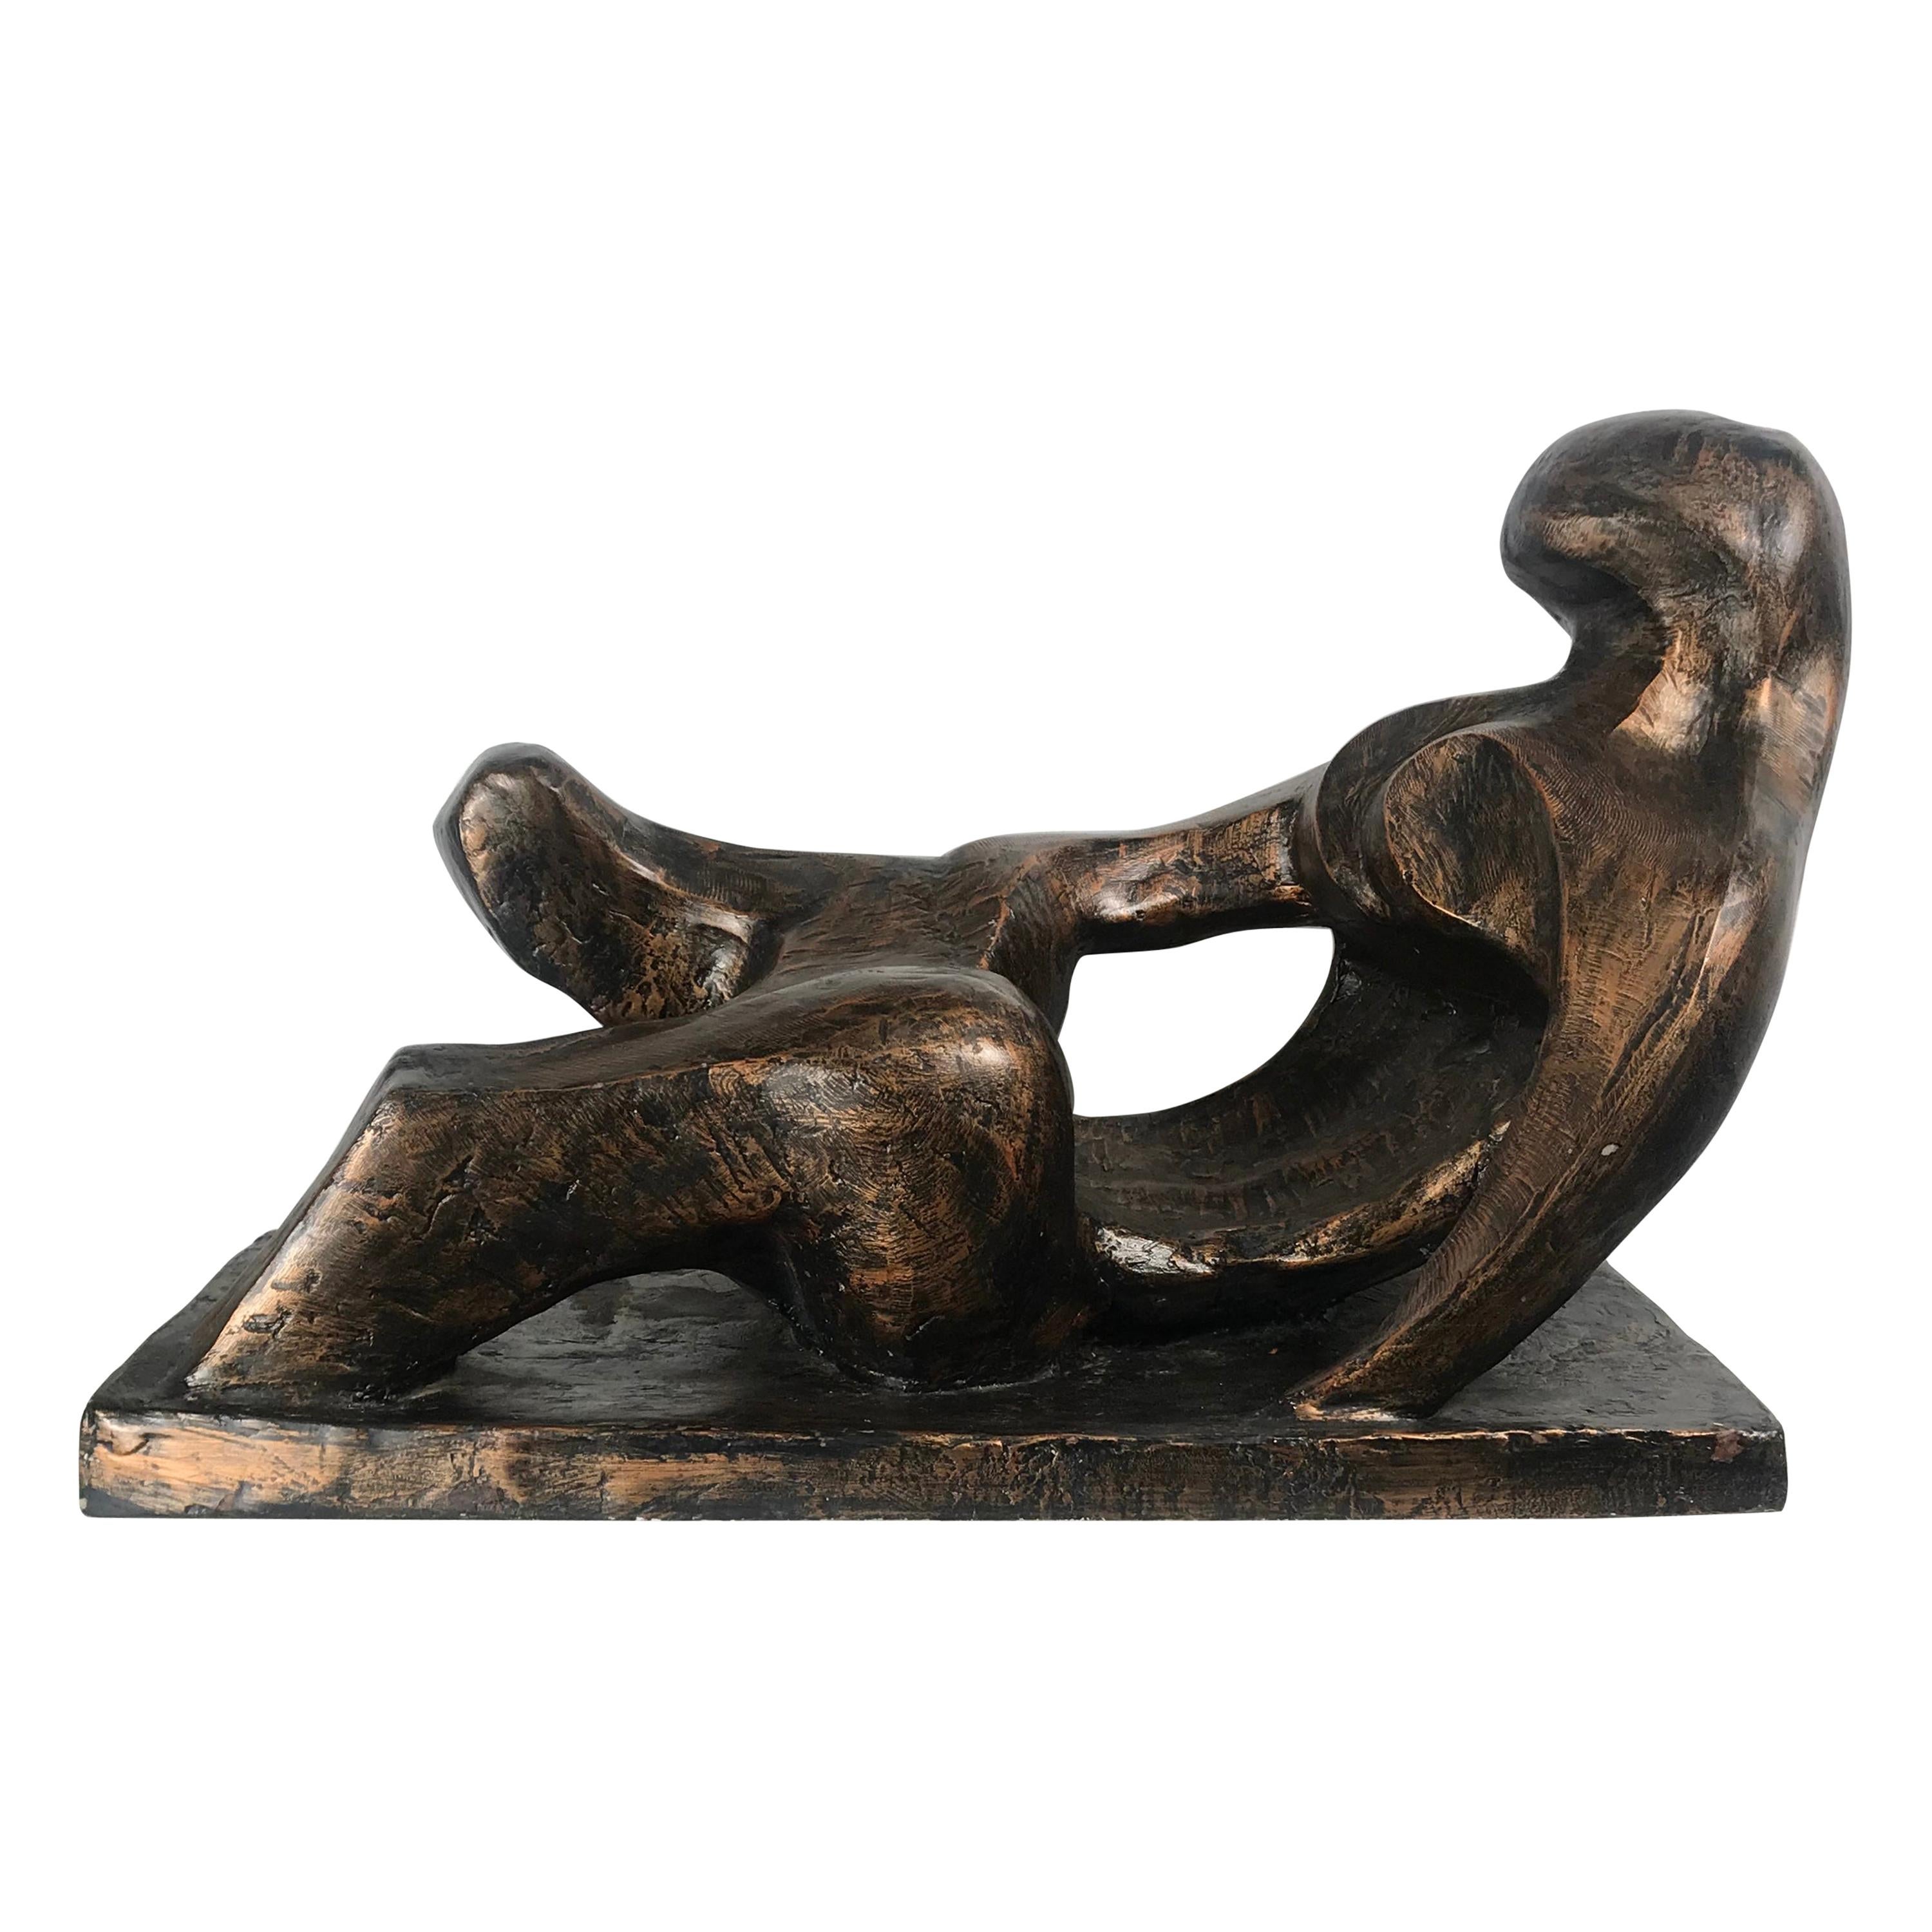 Large Modernist Reclining Figure, Bronzed Resin in the Manner of Henry Moore